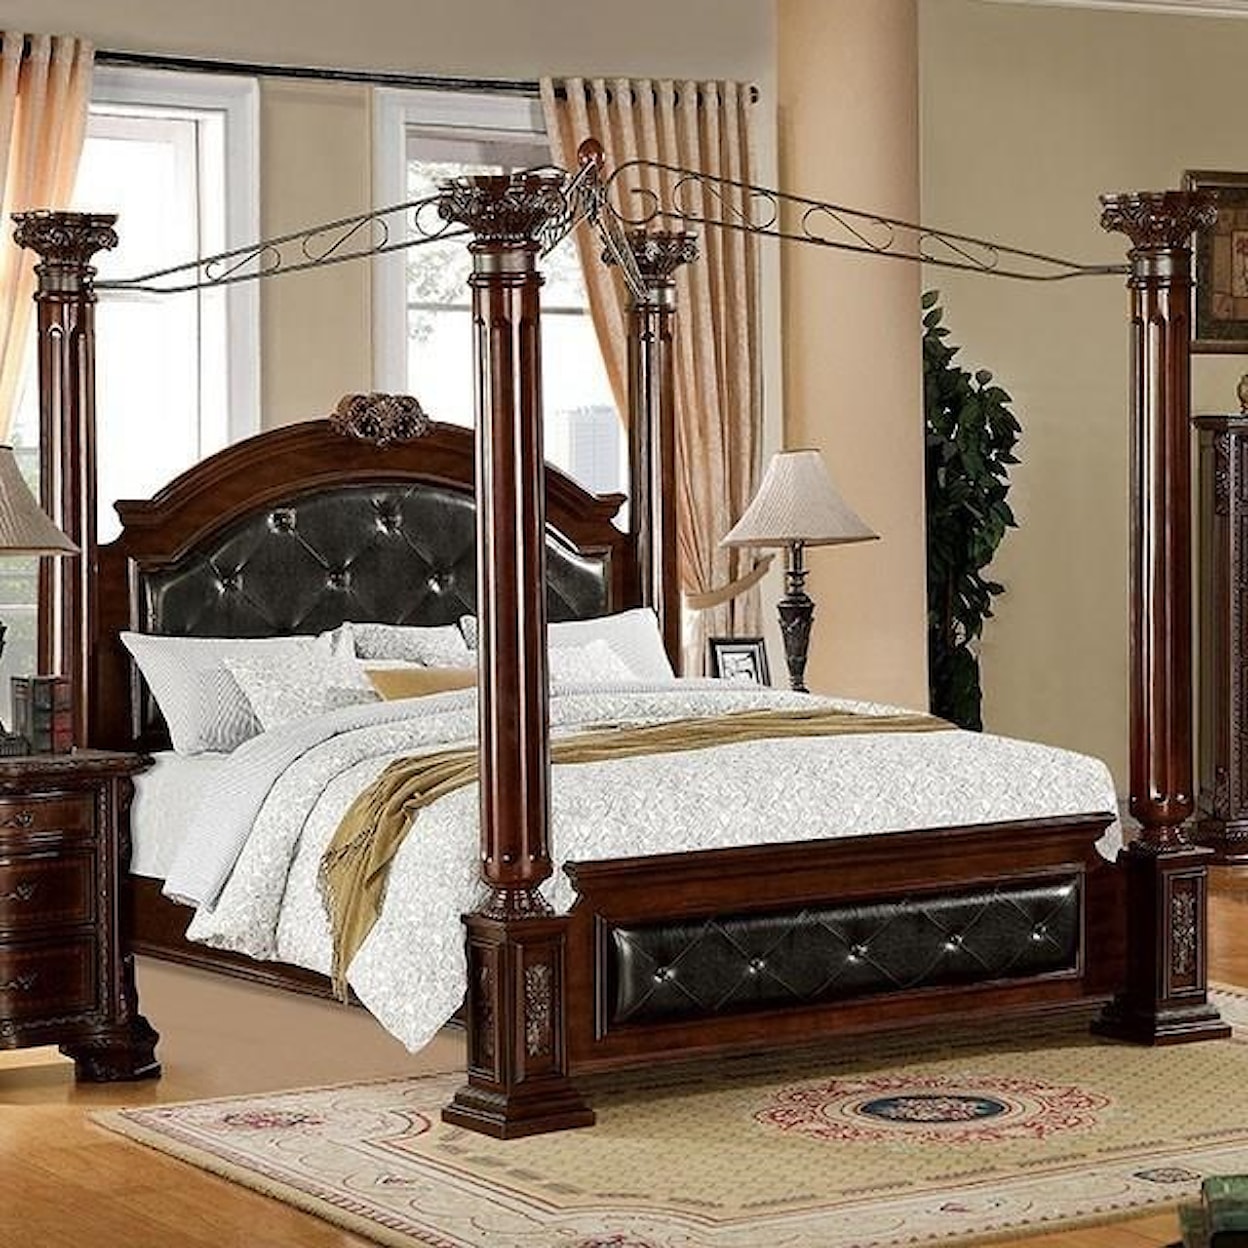 Furniture of America Mandalay King Canopy Bed